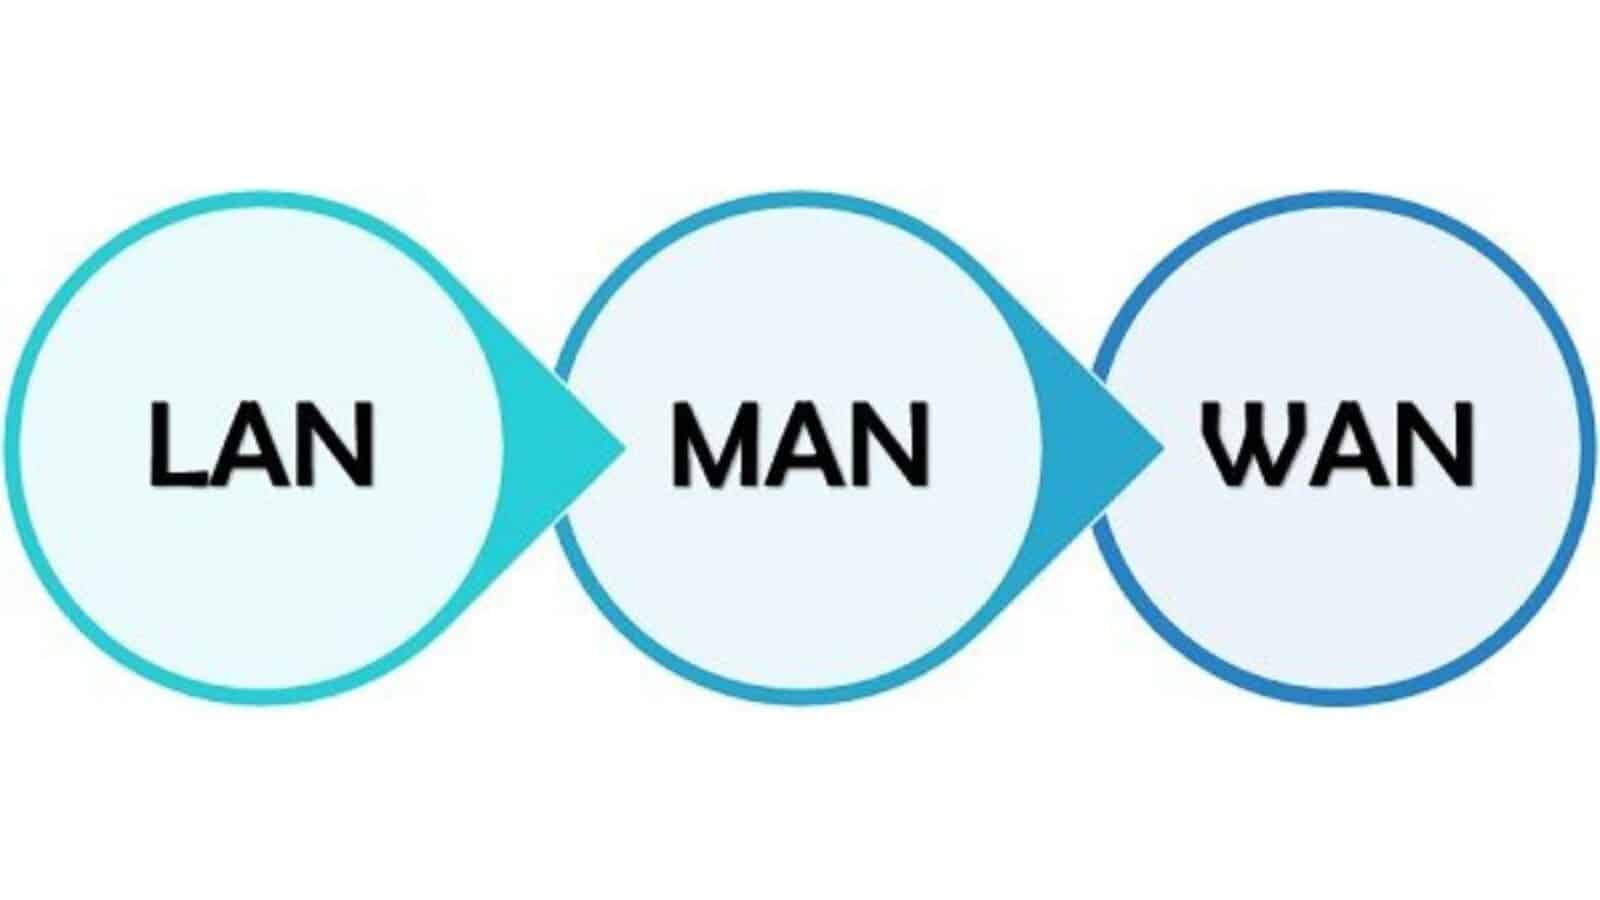 Overview of Different Types of Computer Networks (LAN, MAN, and WAN)